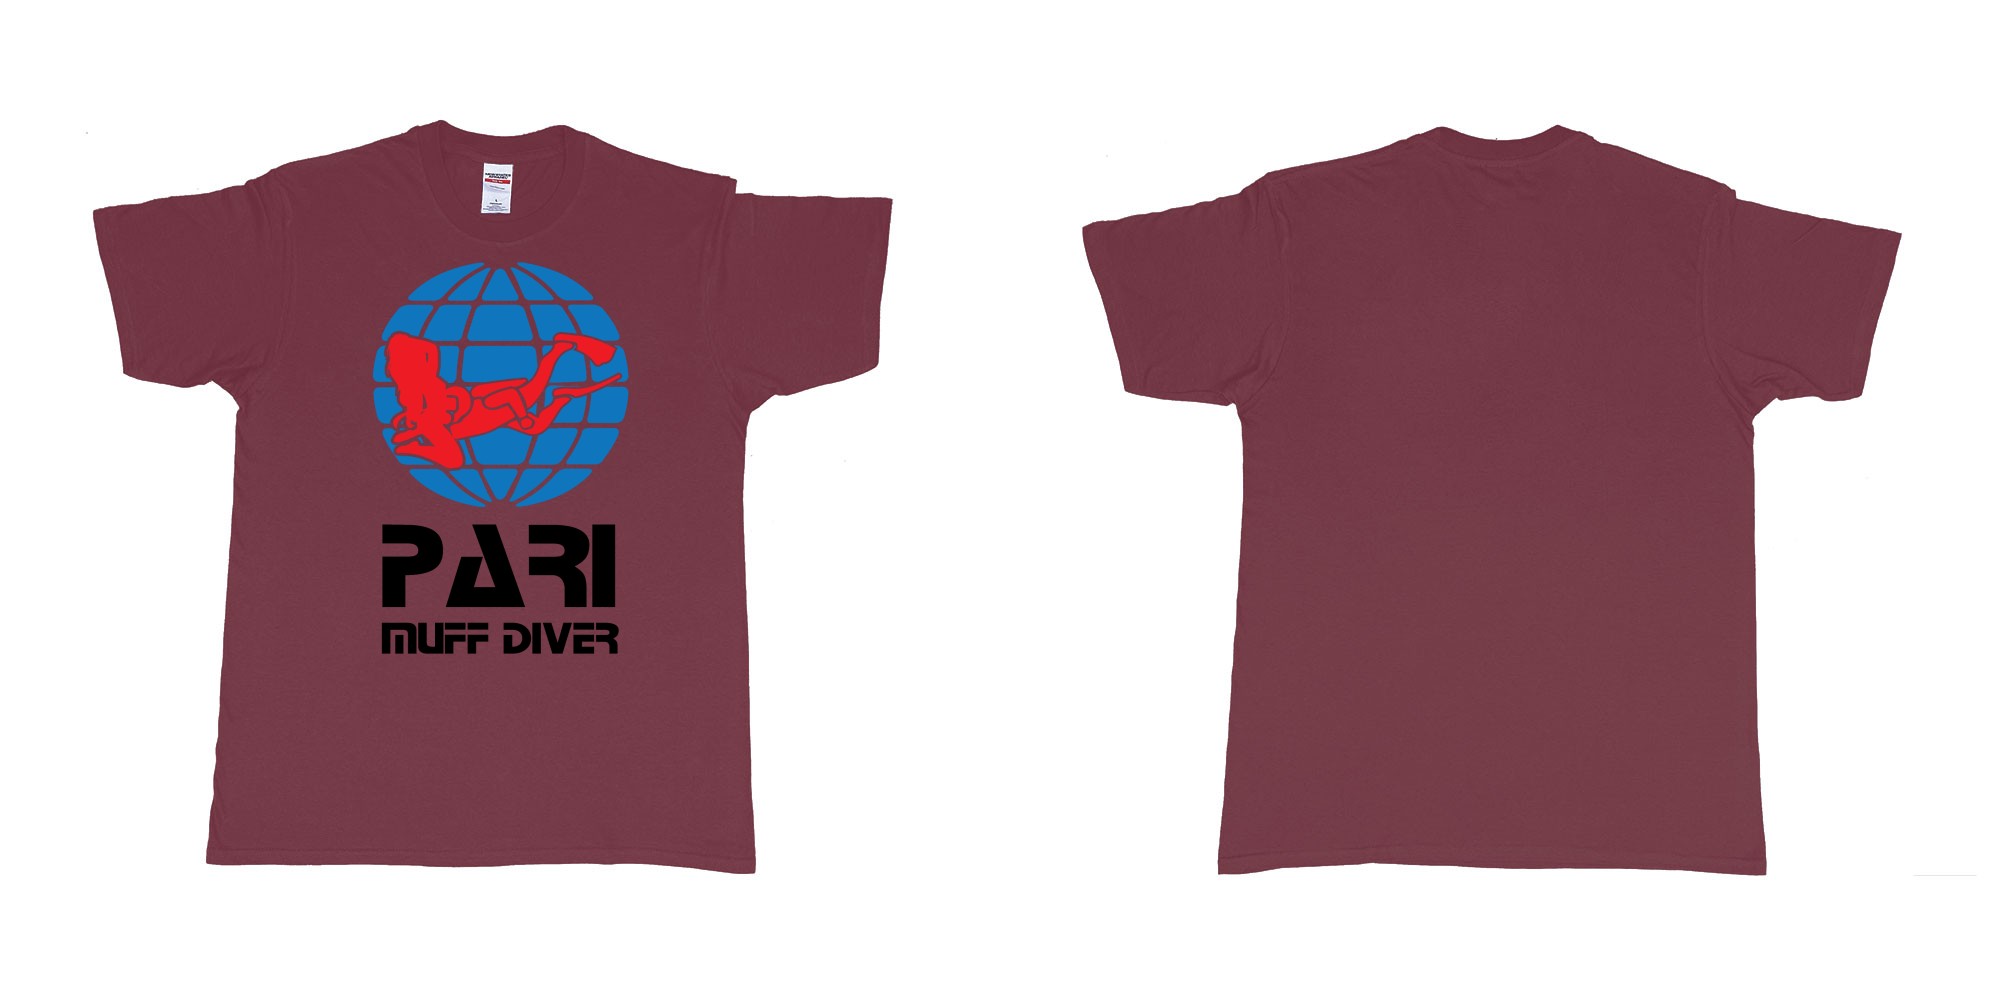 Custom tshirt design PADI muff diver scuba tshirt in fabric color marron choice your own text made in Bali by The Pirate Way